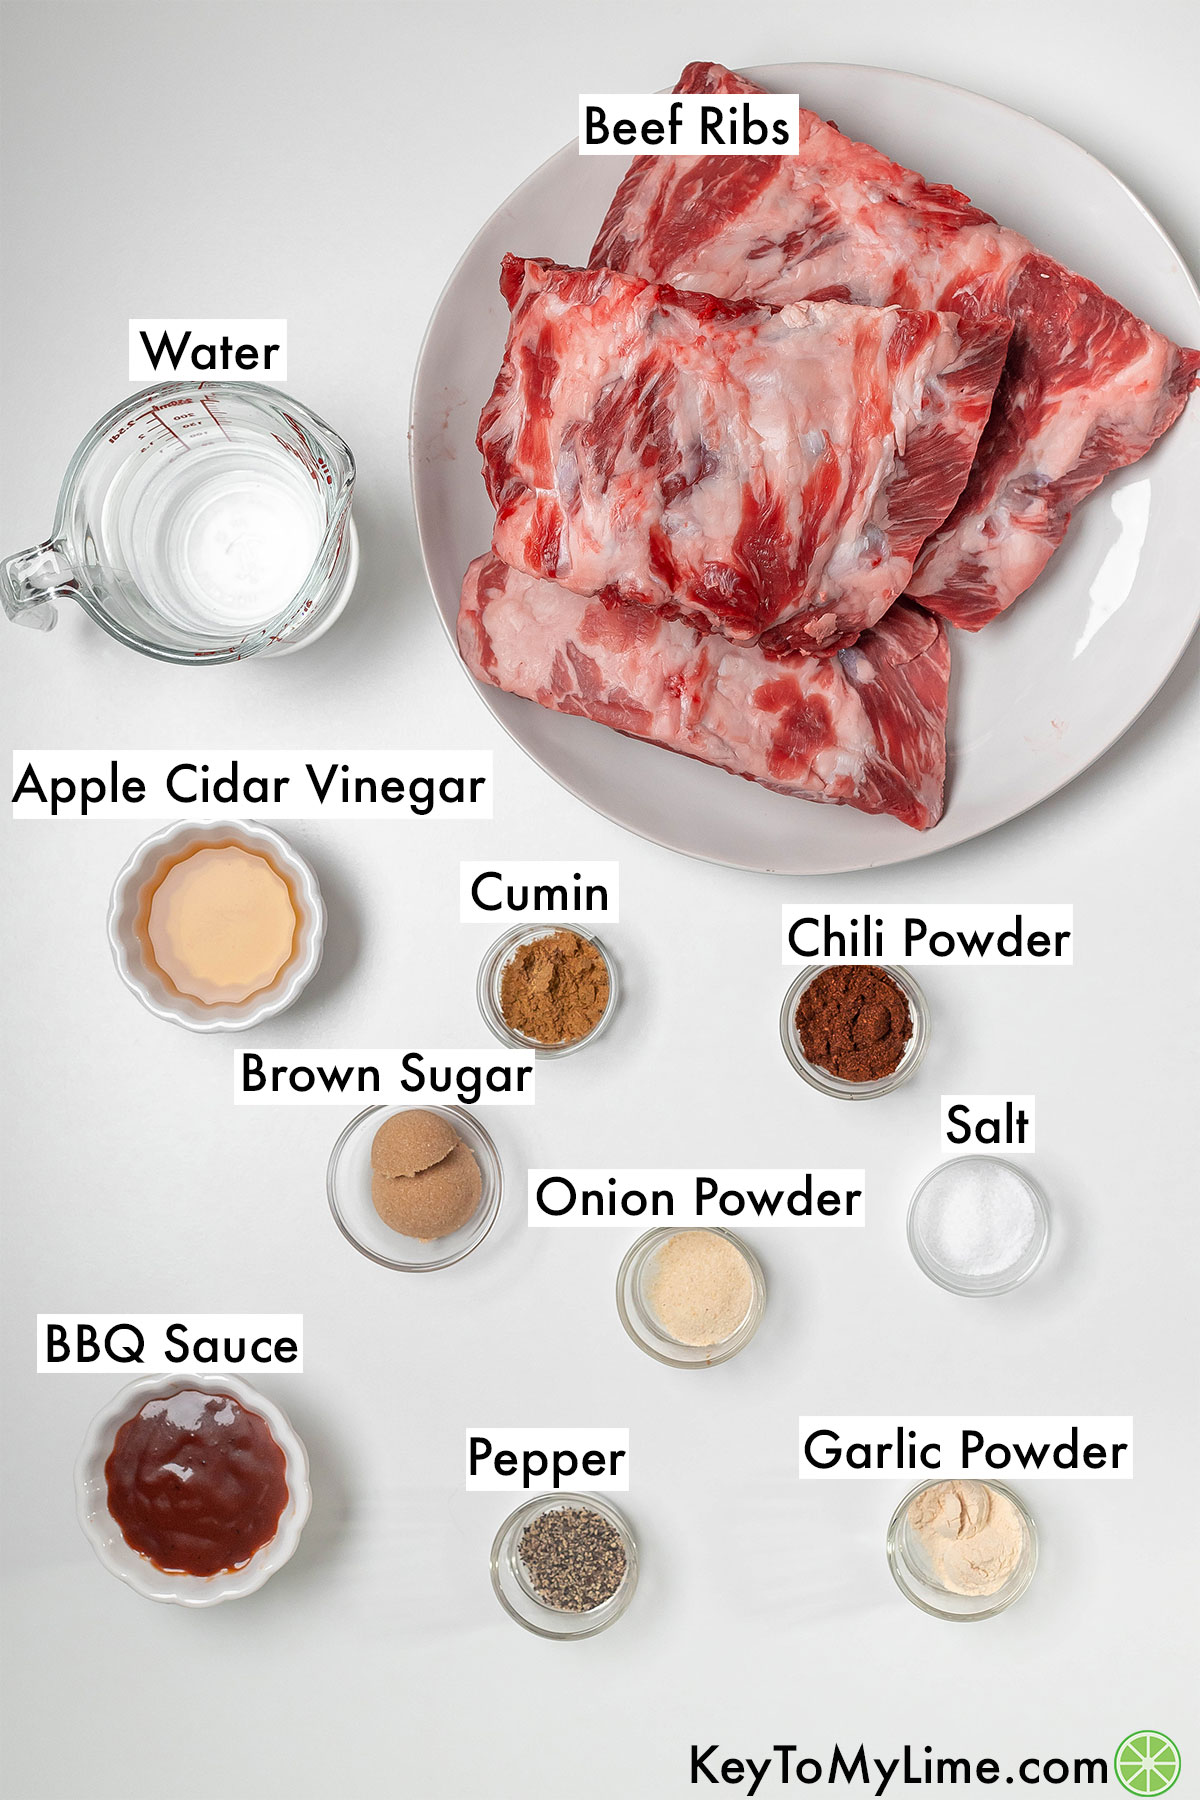 The labeled ingredients for Instant Pot beef ribs.